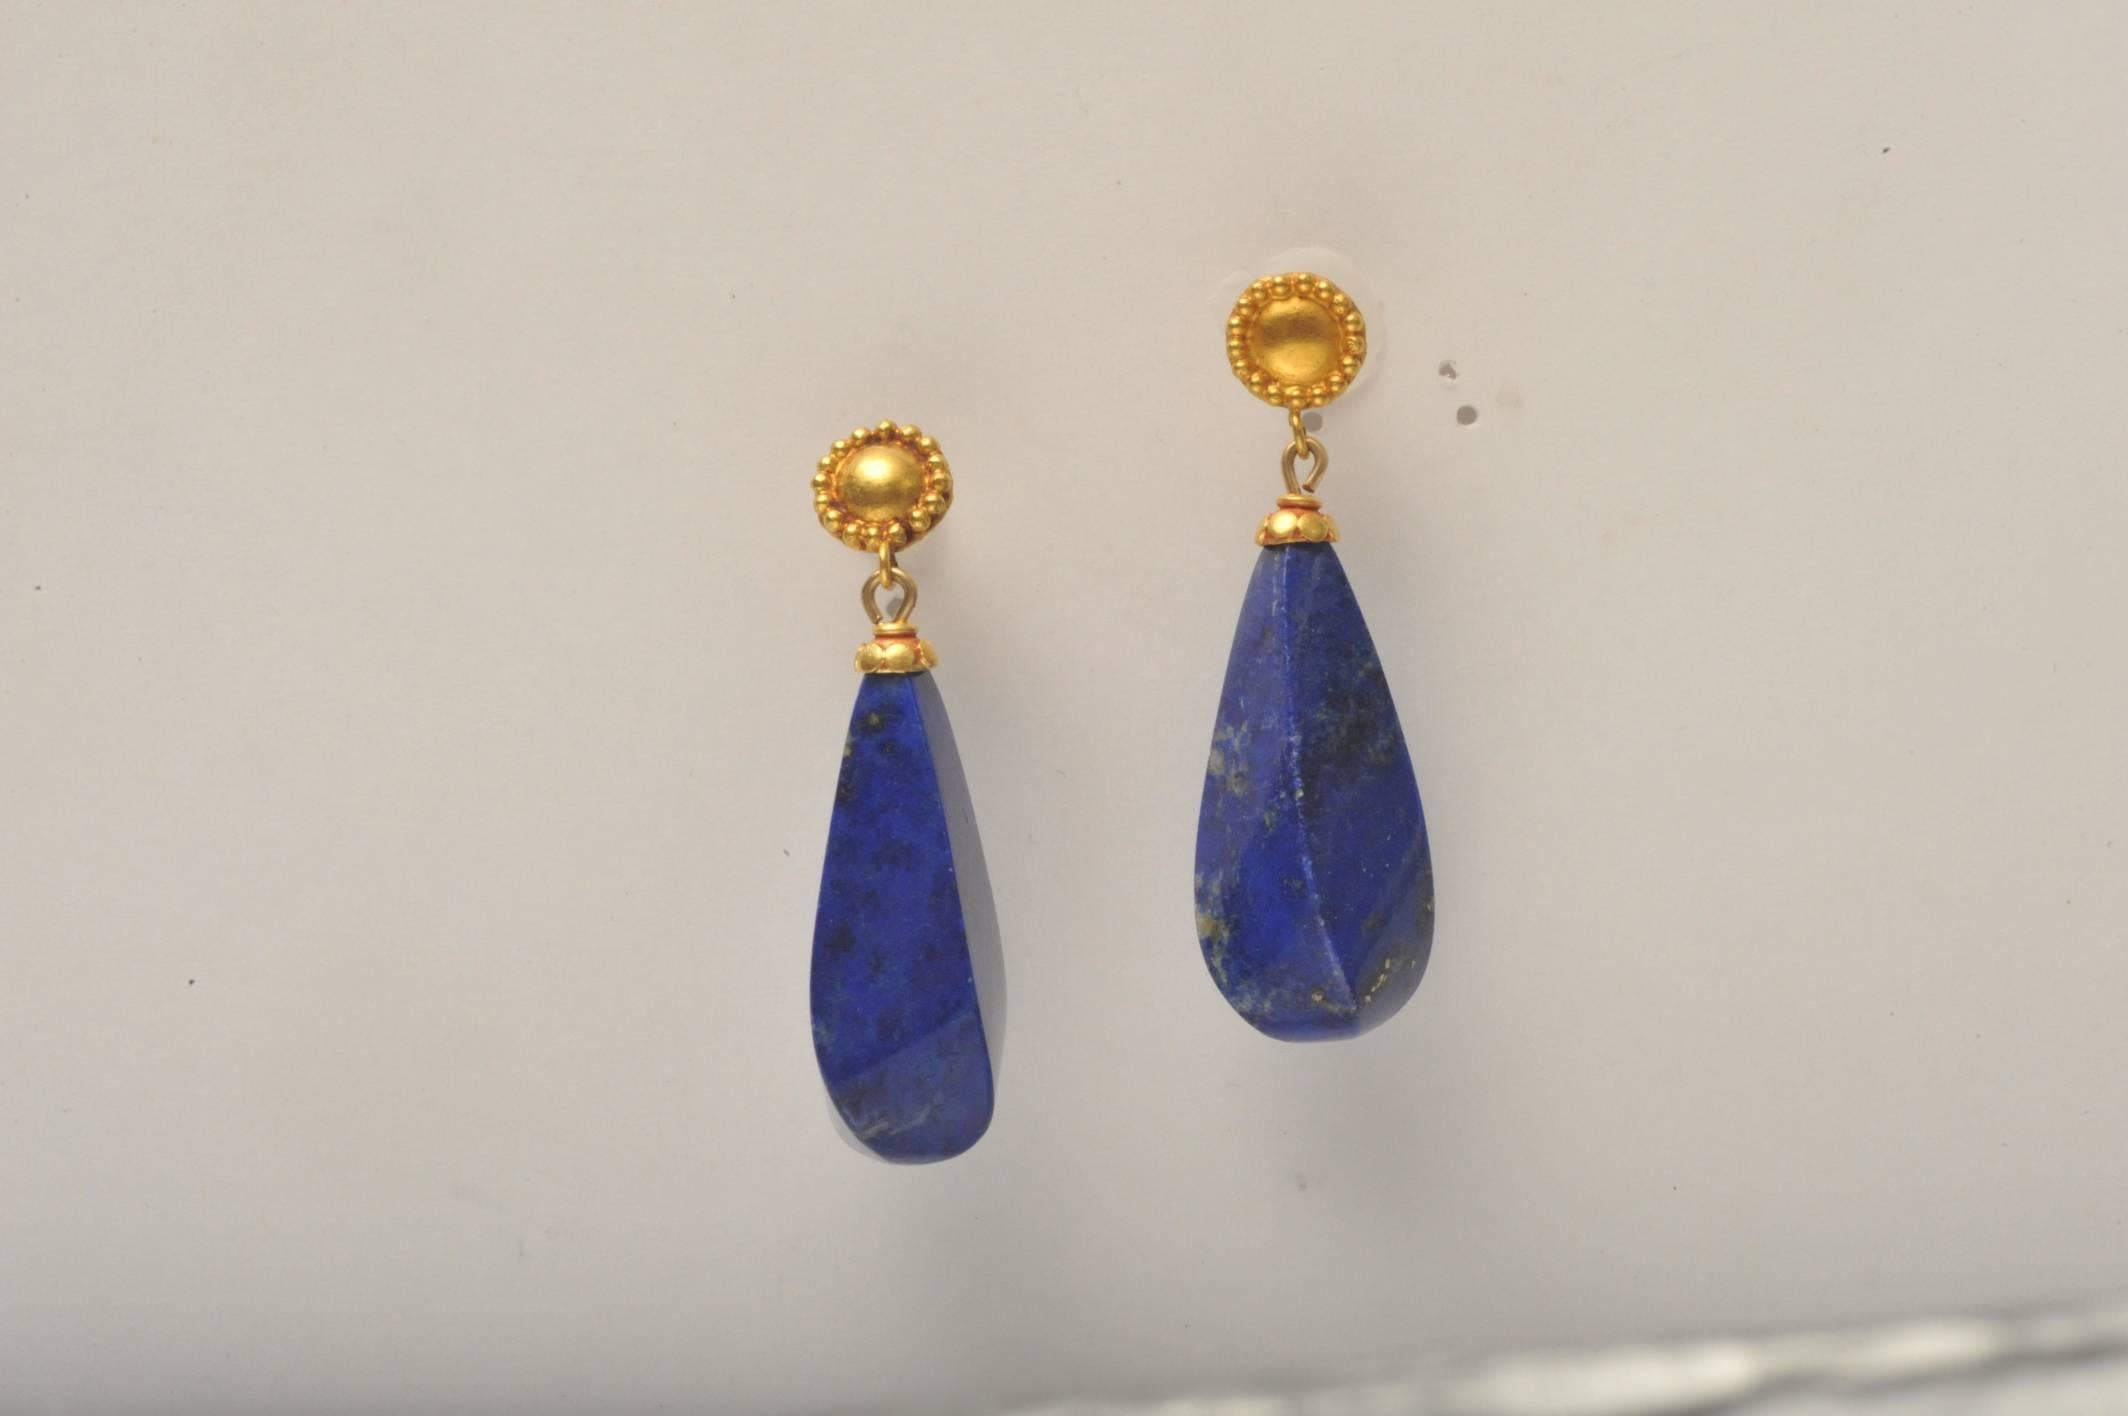 A brilliant pair of natural lapis lazuli cut in a rare and dimensional way, with 22K gold end caps mounted on 22K gold posts.

Fine Jewelry located on Nantucket island